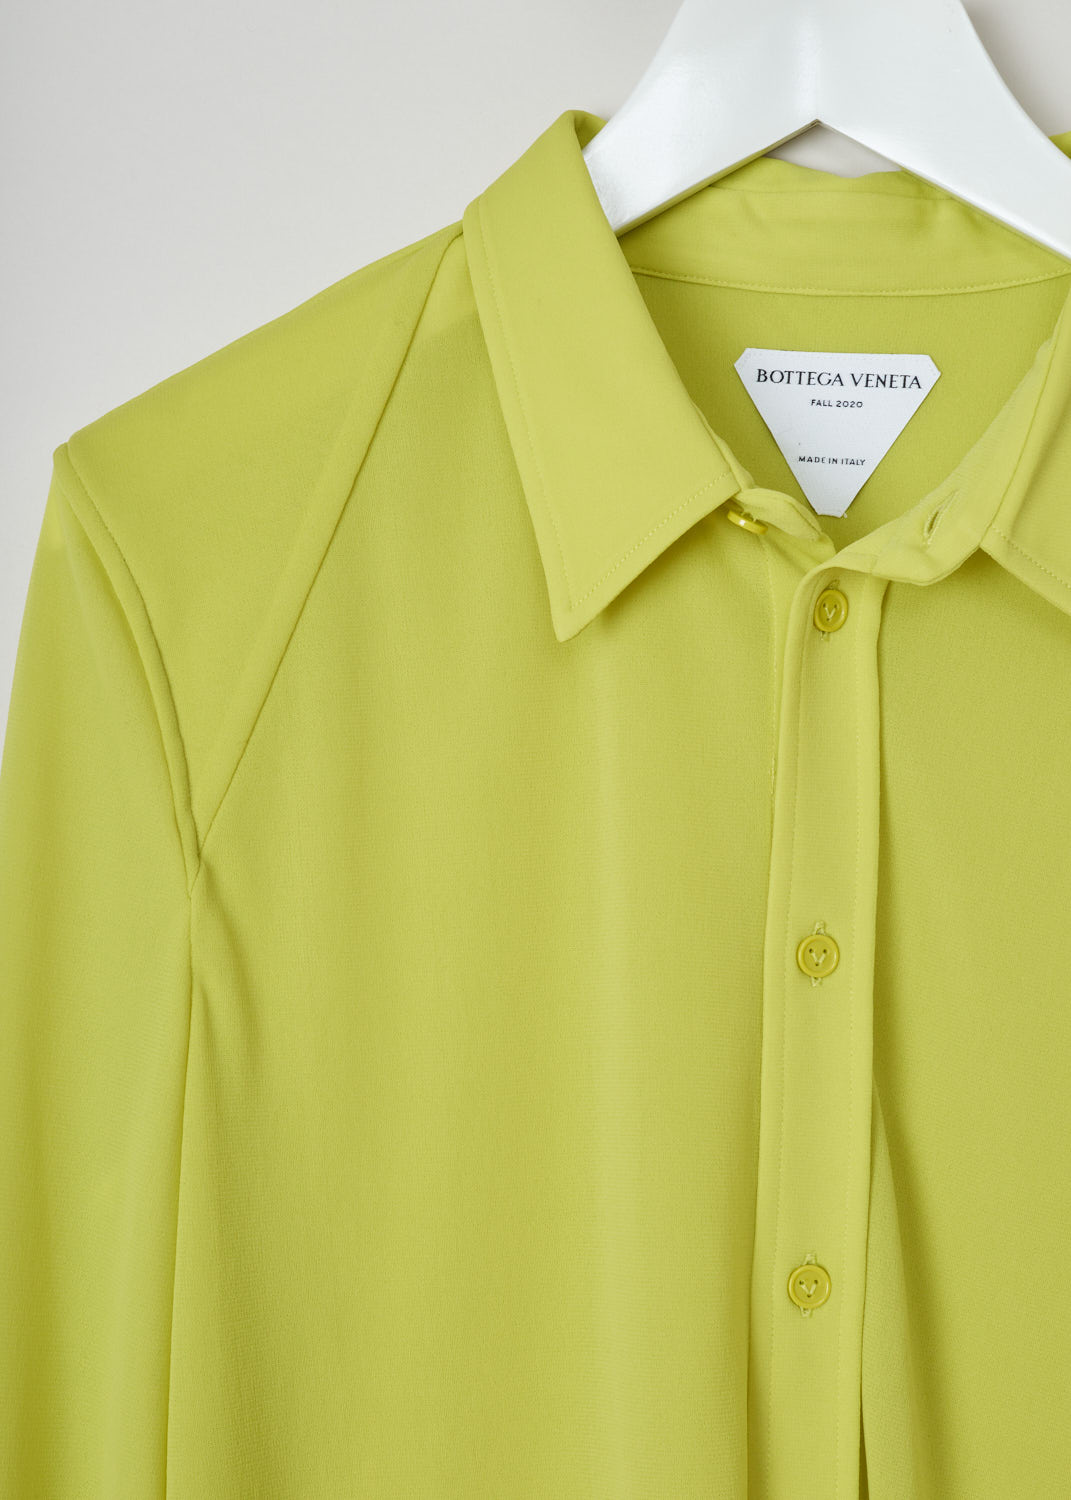 Bottega Veneta, See through yellow blouse, 636591_V0210_7275, yellow, detail, Designed with a oversized fit in mind. Featuring a pointed collar, long cuffed sleeves with three buttons on them. And a straight hem with two short splits on the side seam. Keep in mind that the fabric is slightly see through.